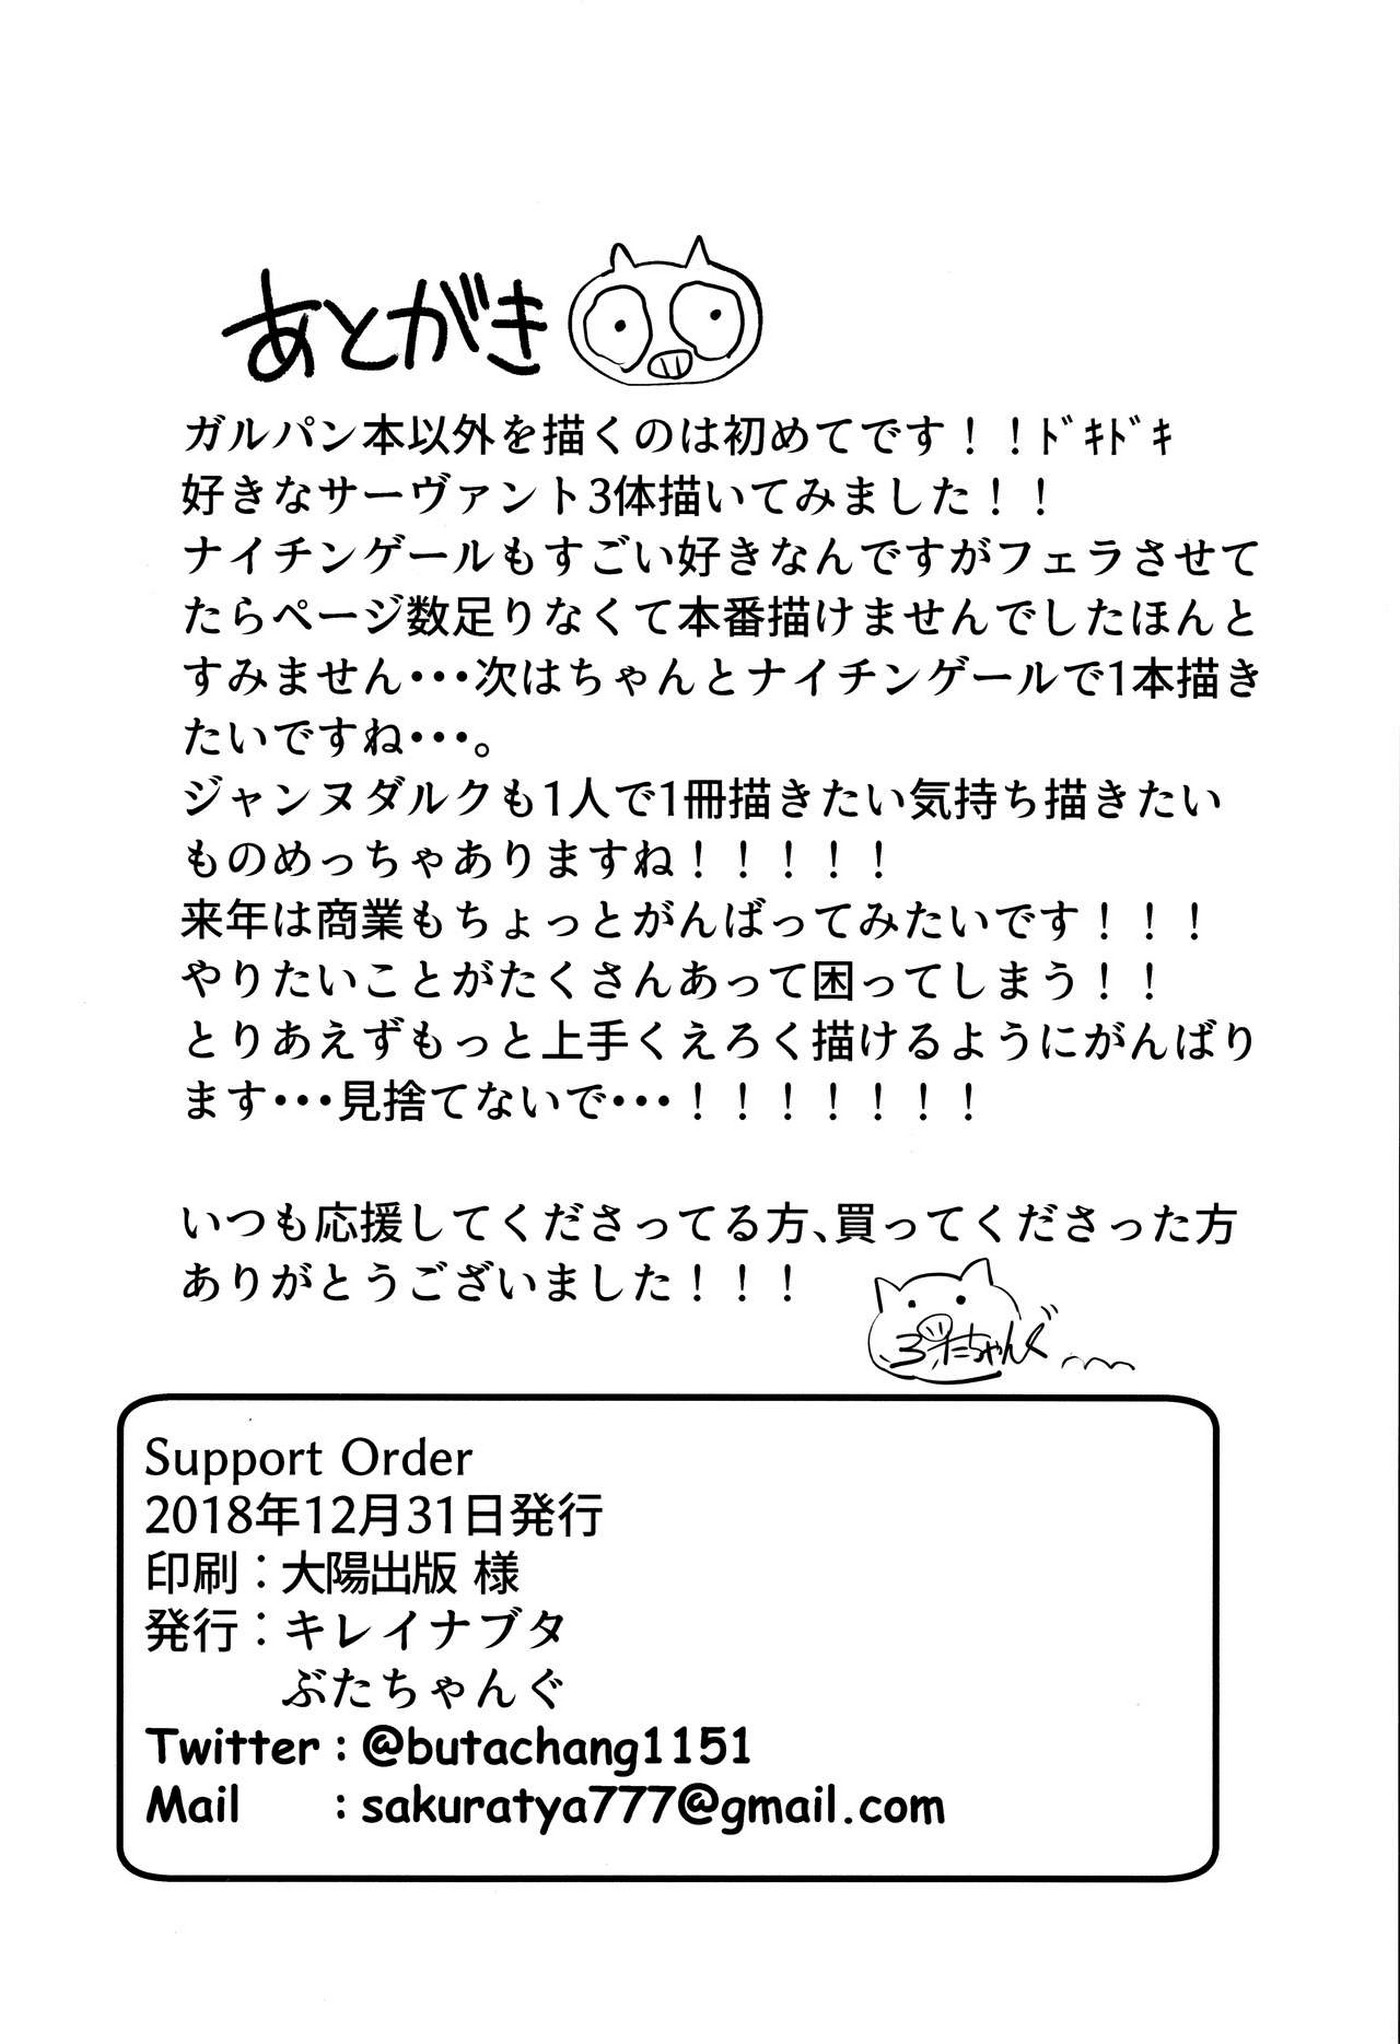 Support Order Fate Grand Order 24